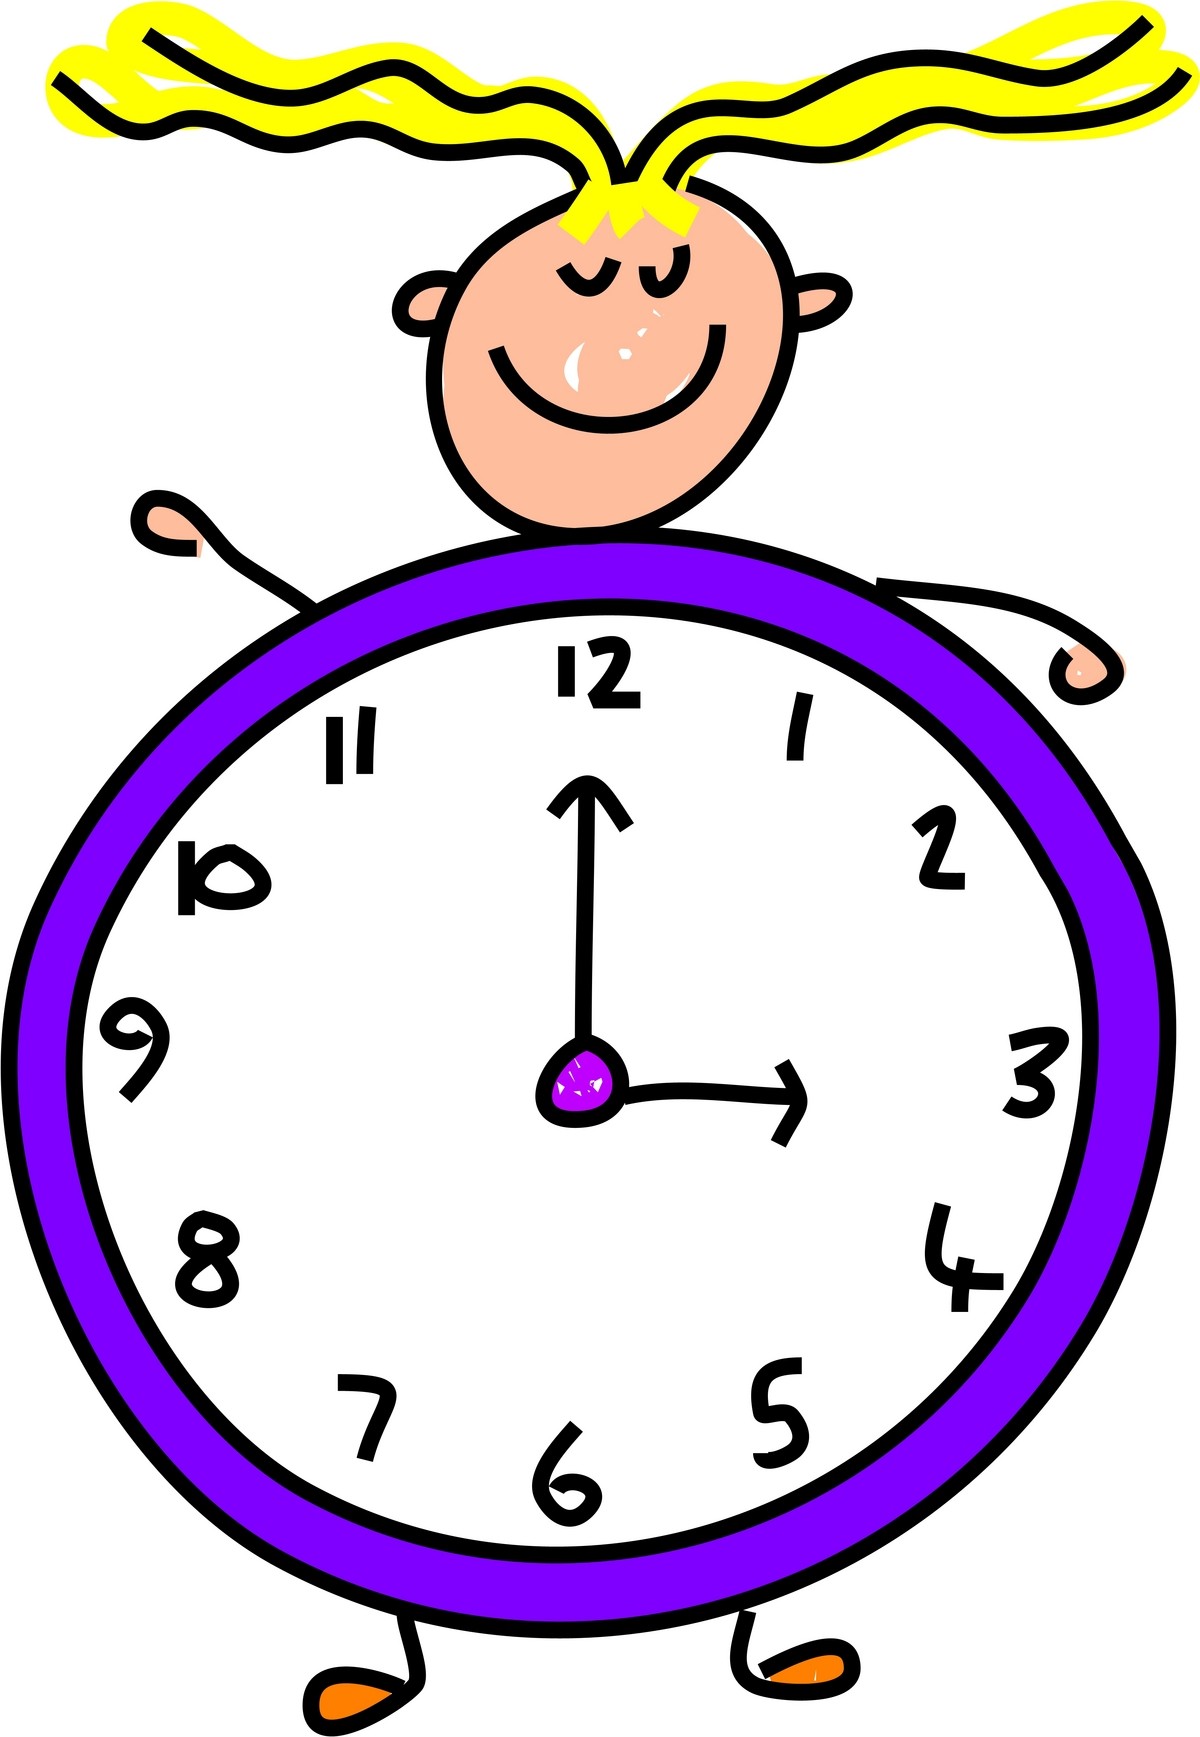 Free Time Clock Clipart, Download Free Clip Art, Free Clip.